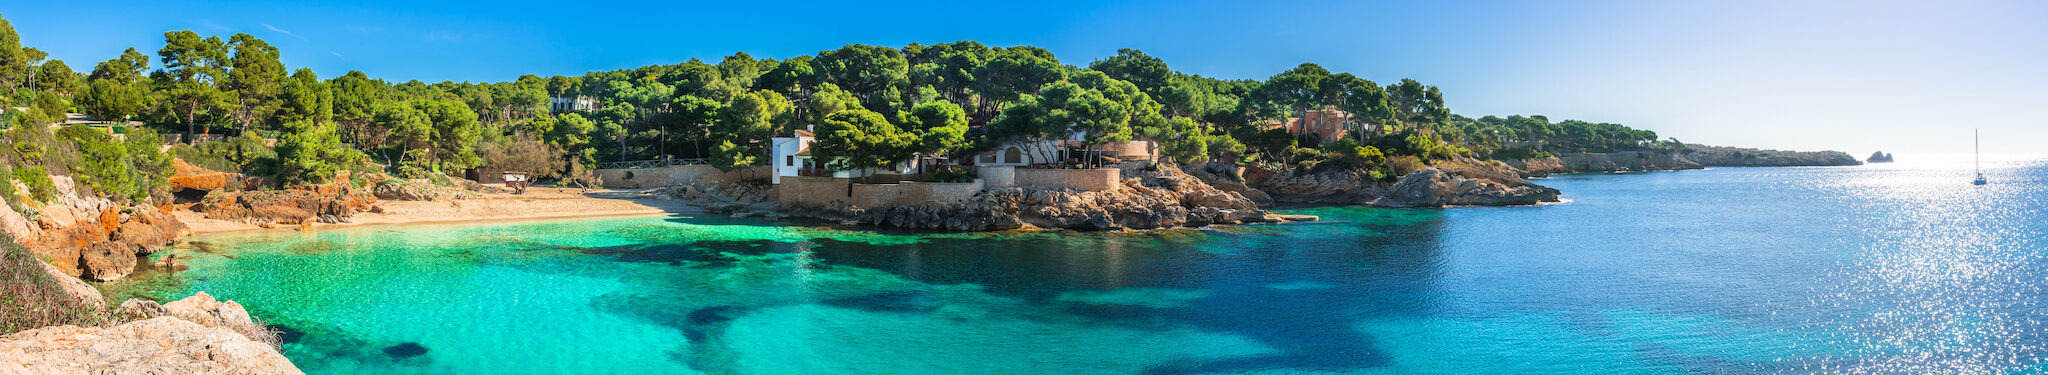 Check out another great Spanish holiday island